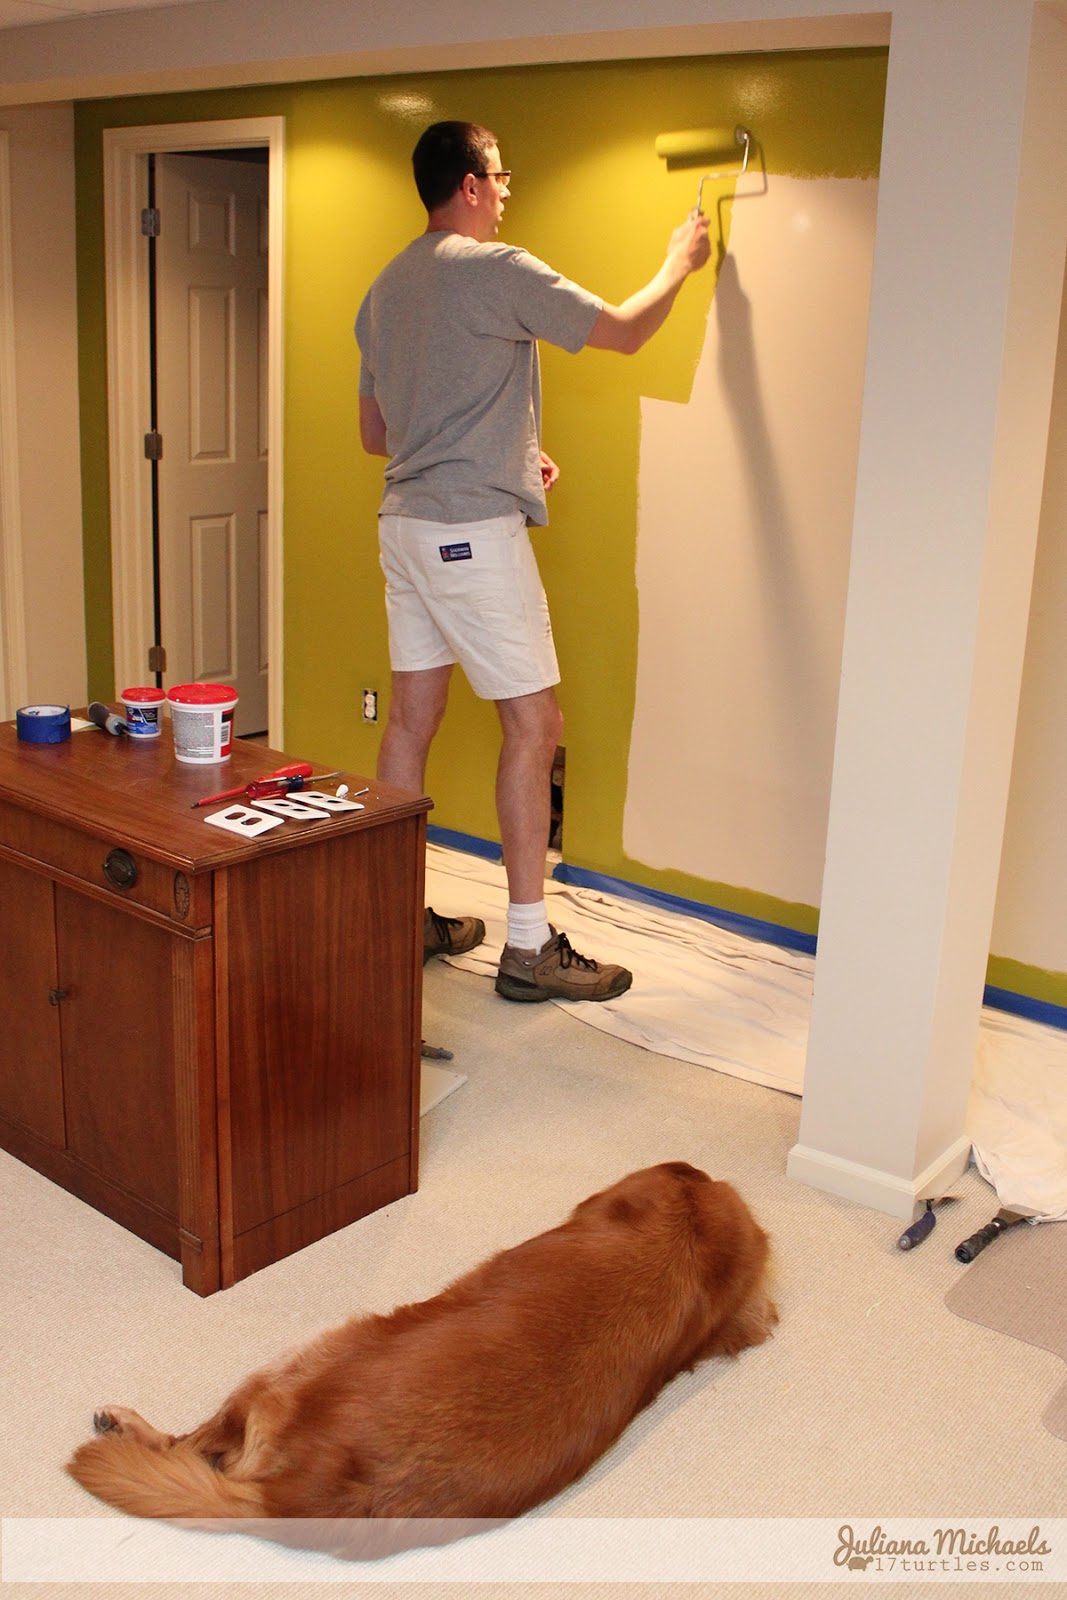 Juliana Michaels Scrapbook Room Makeover During Painting The Walls #sprizoflime